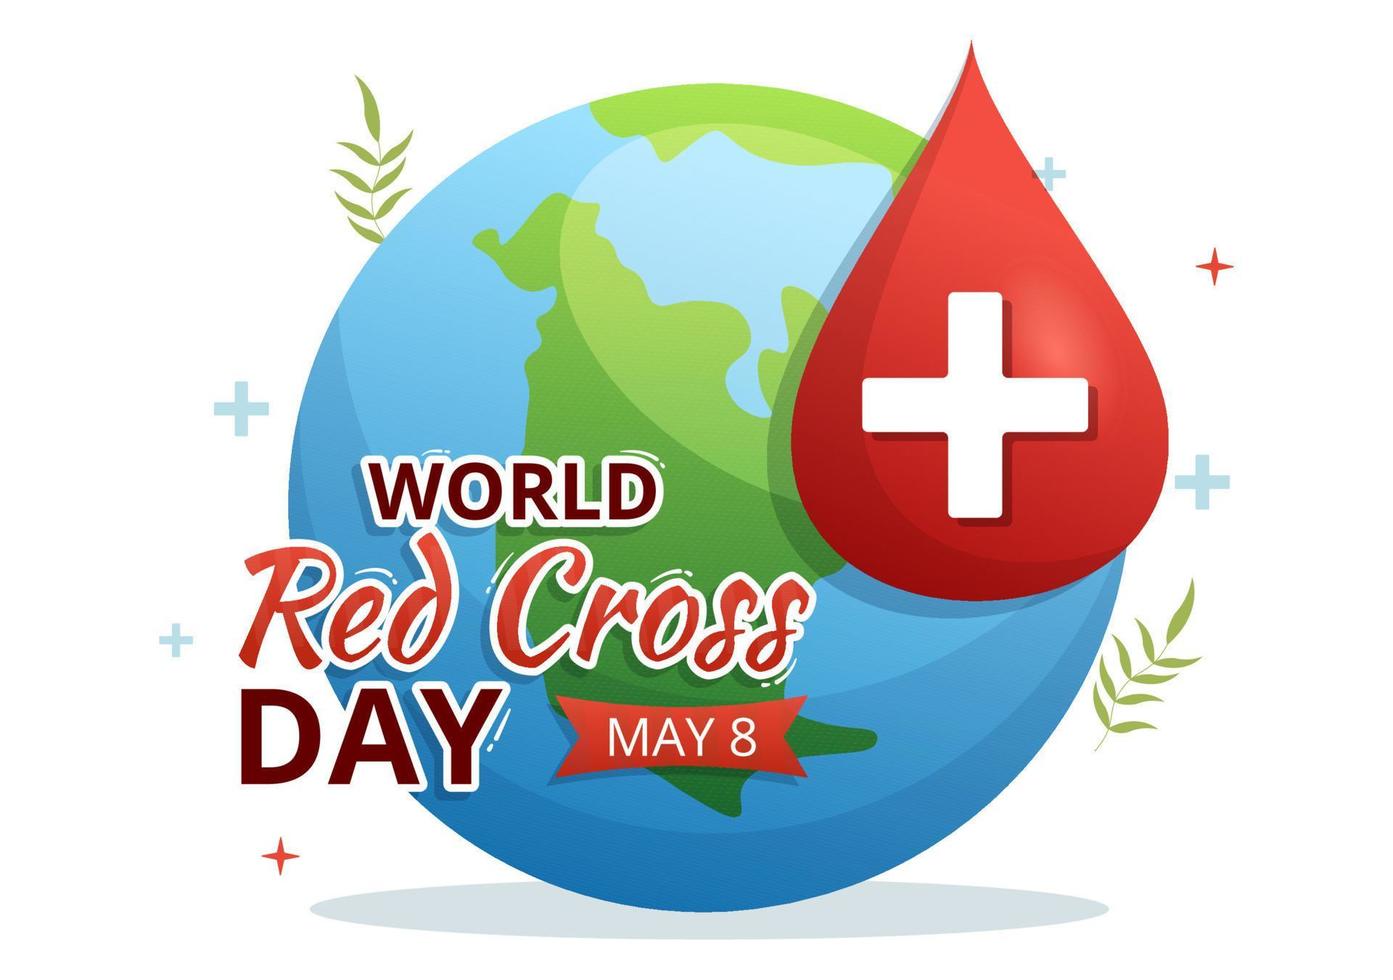 World Red Cross Day on May 8 Illustration to Medical Health and Providing Blood In Hand Drawn for Web Banner or Landing Page Templates vector